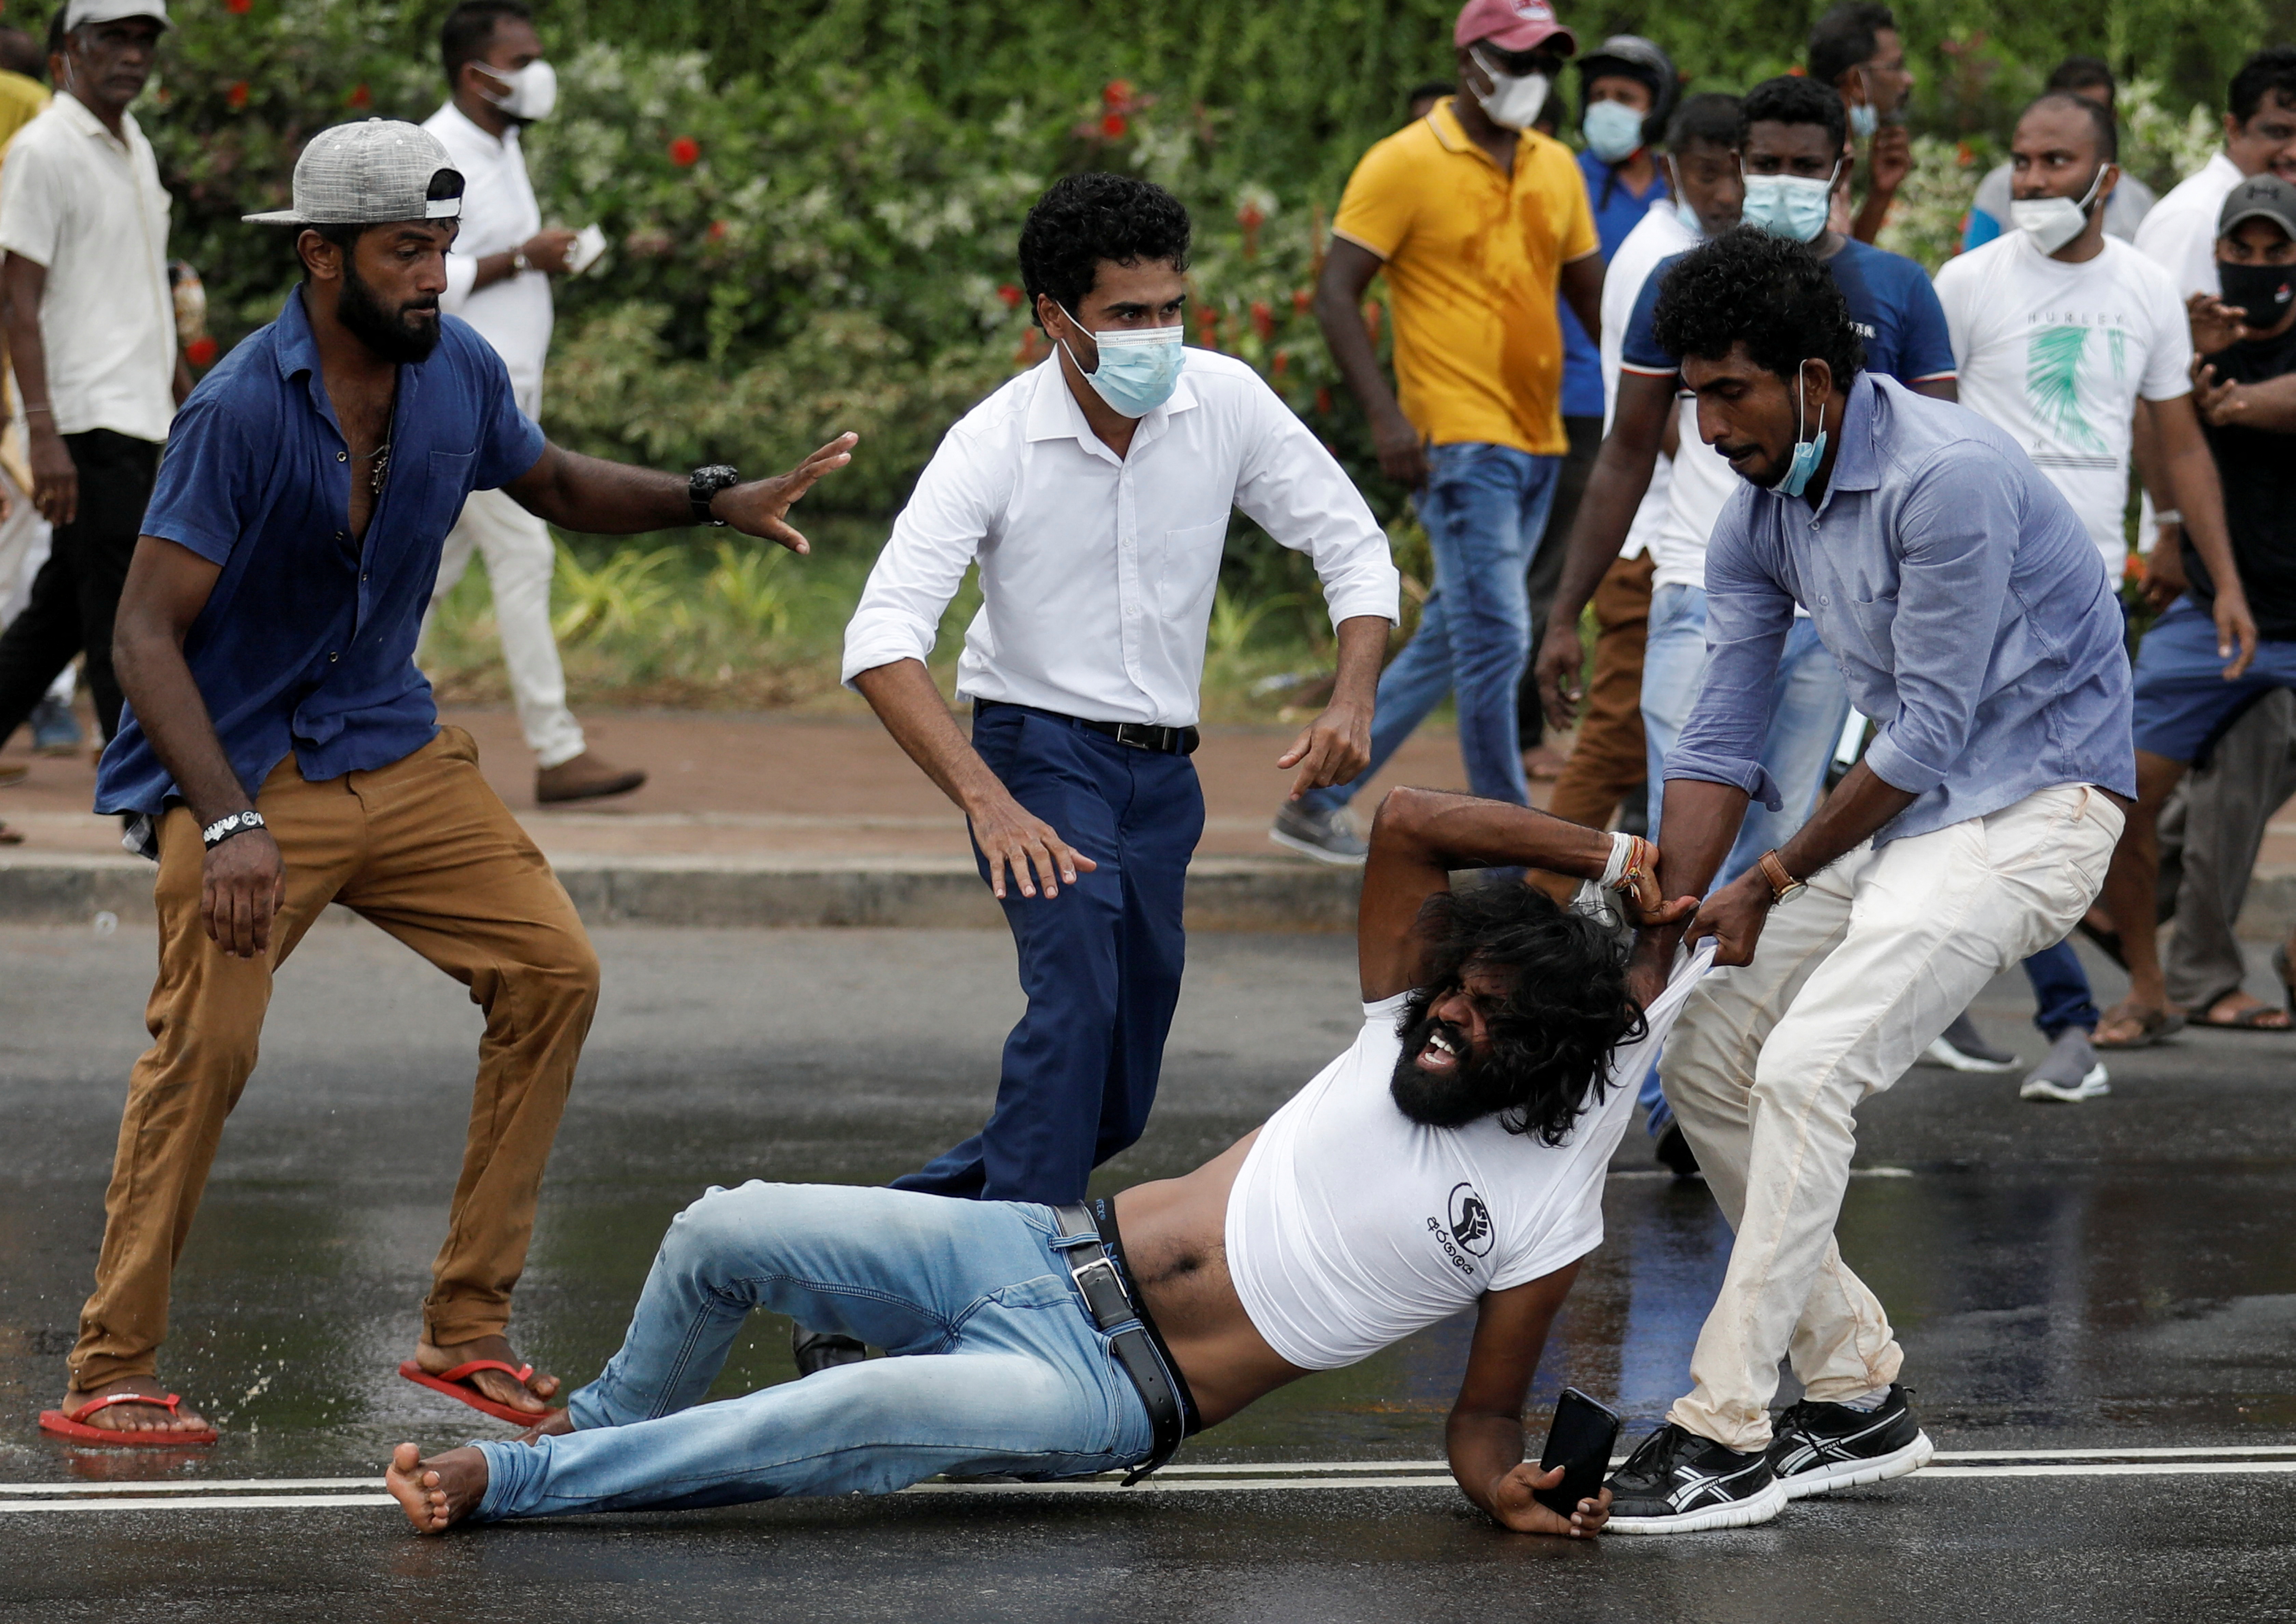 Sri Lanka's ruling party supporters storm anti-government protest camp, in Colombo